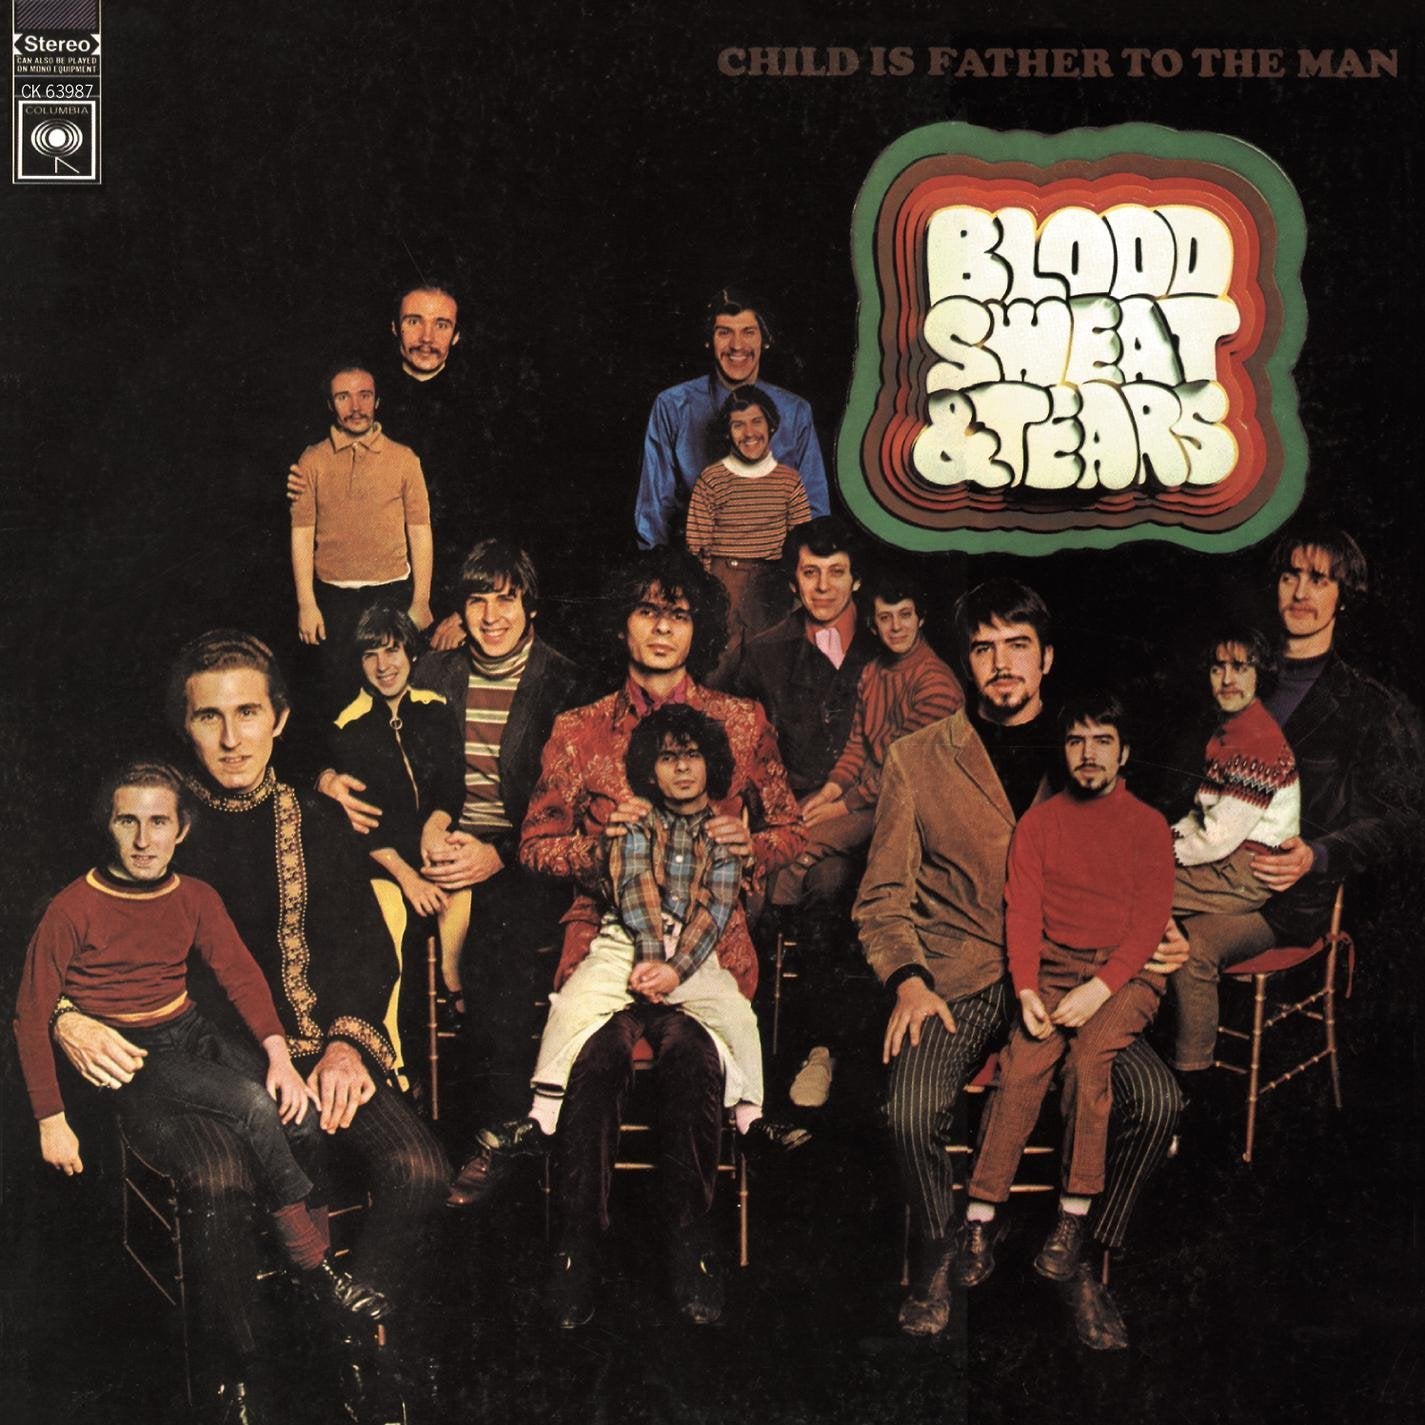 Blood, Sweat & Tears - Child is Father to the Man (Vinyl LP)